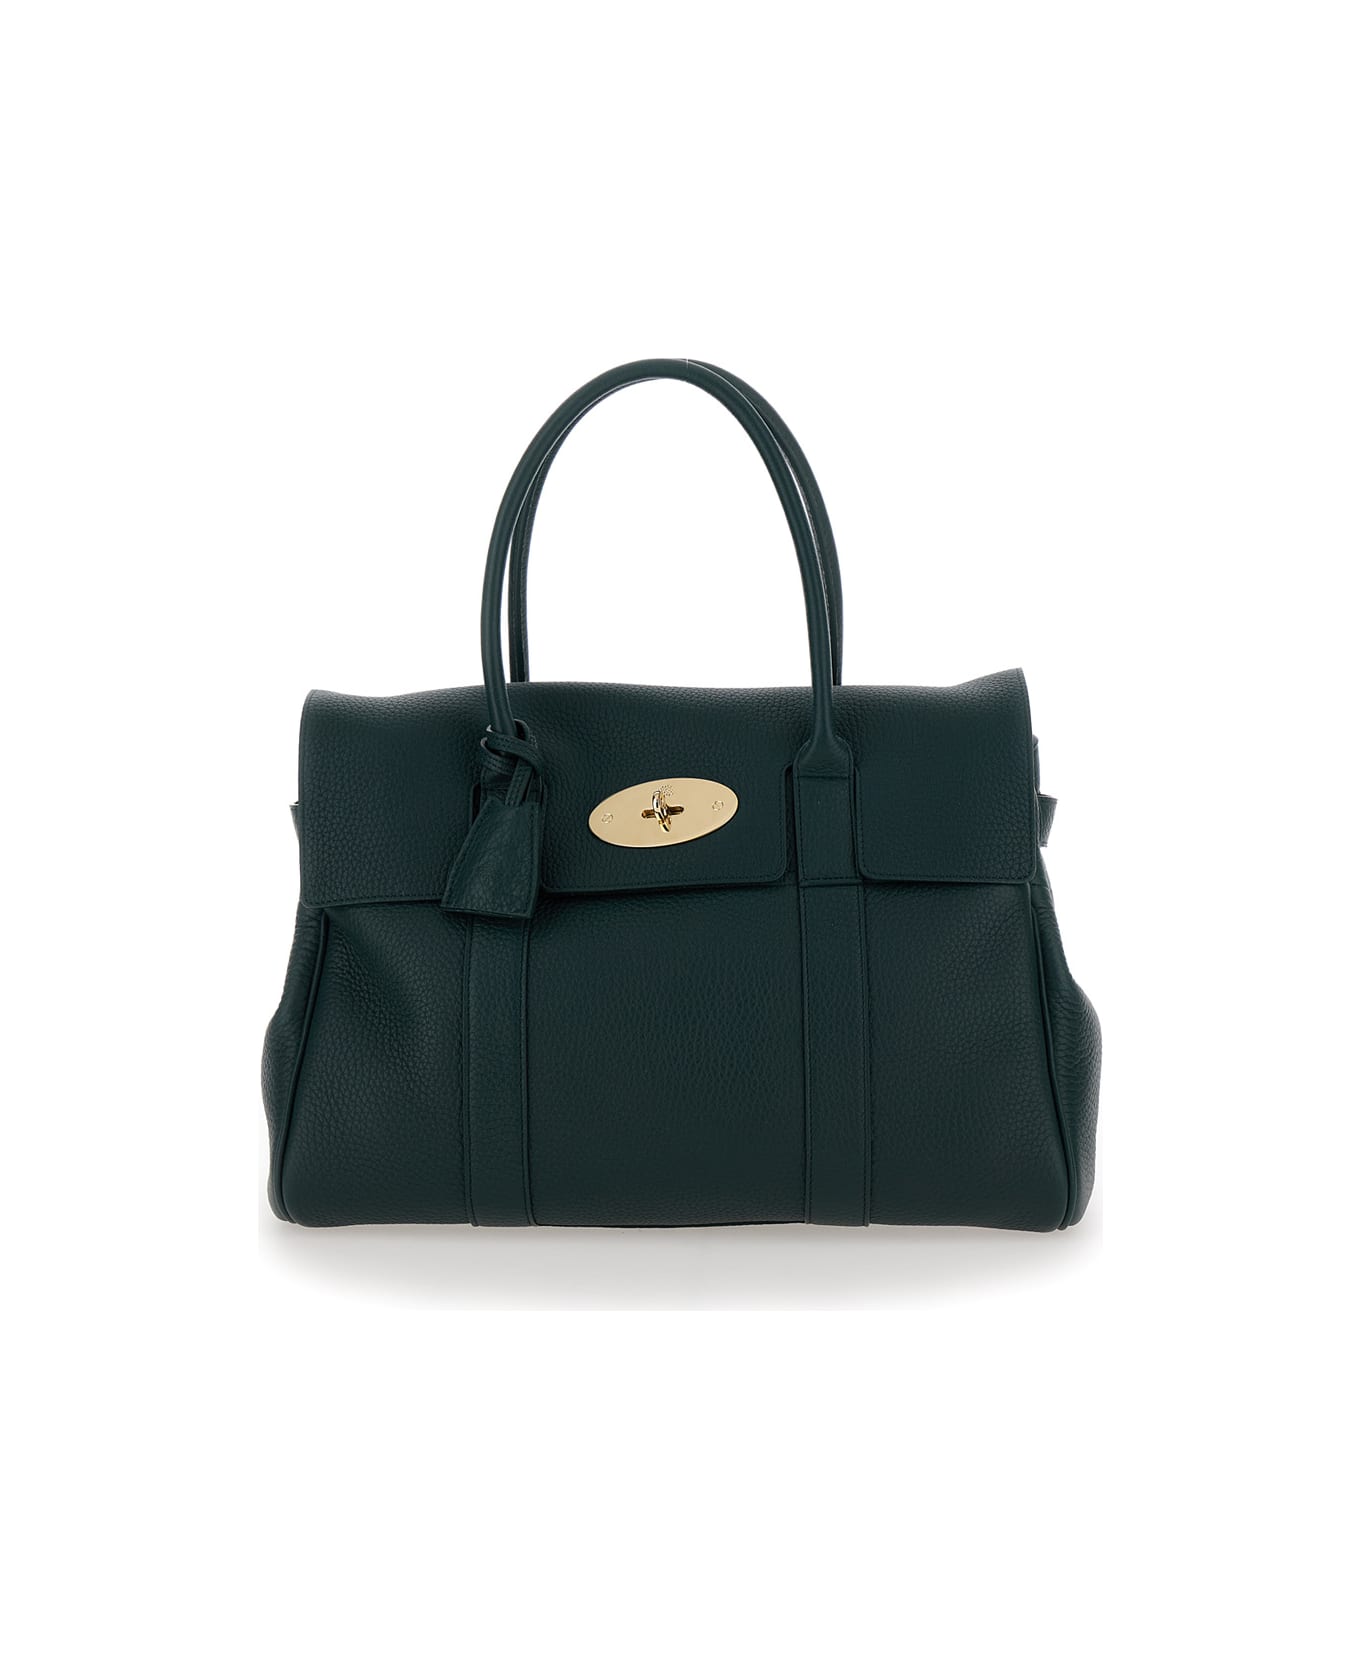 Mulberry 'bayswater' Green Handbag With Postman's Lock In Hammered Leather Woman - Green トートバッグ